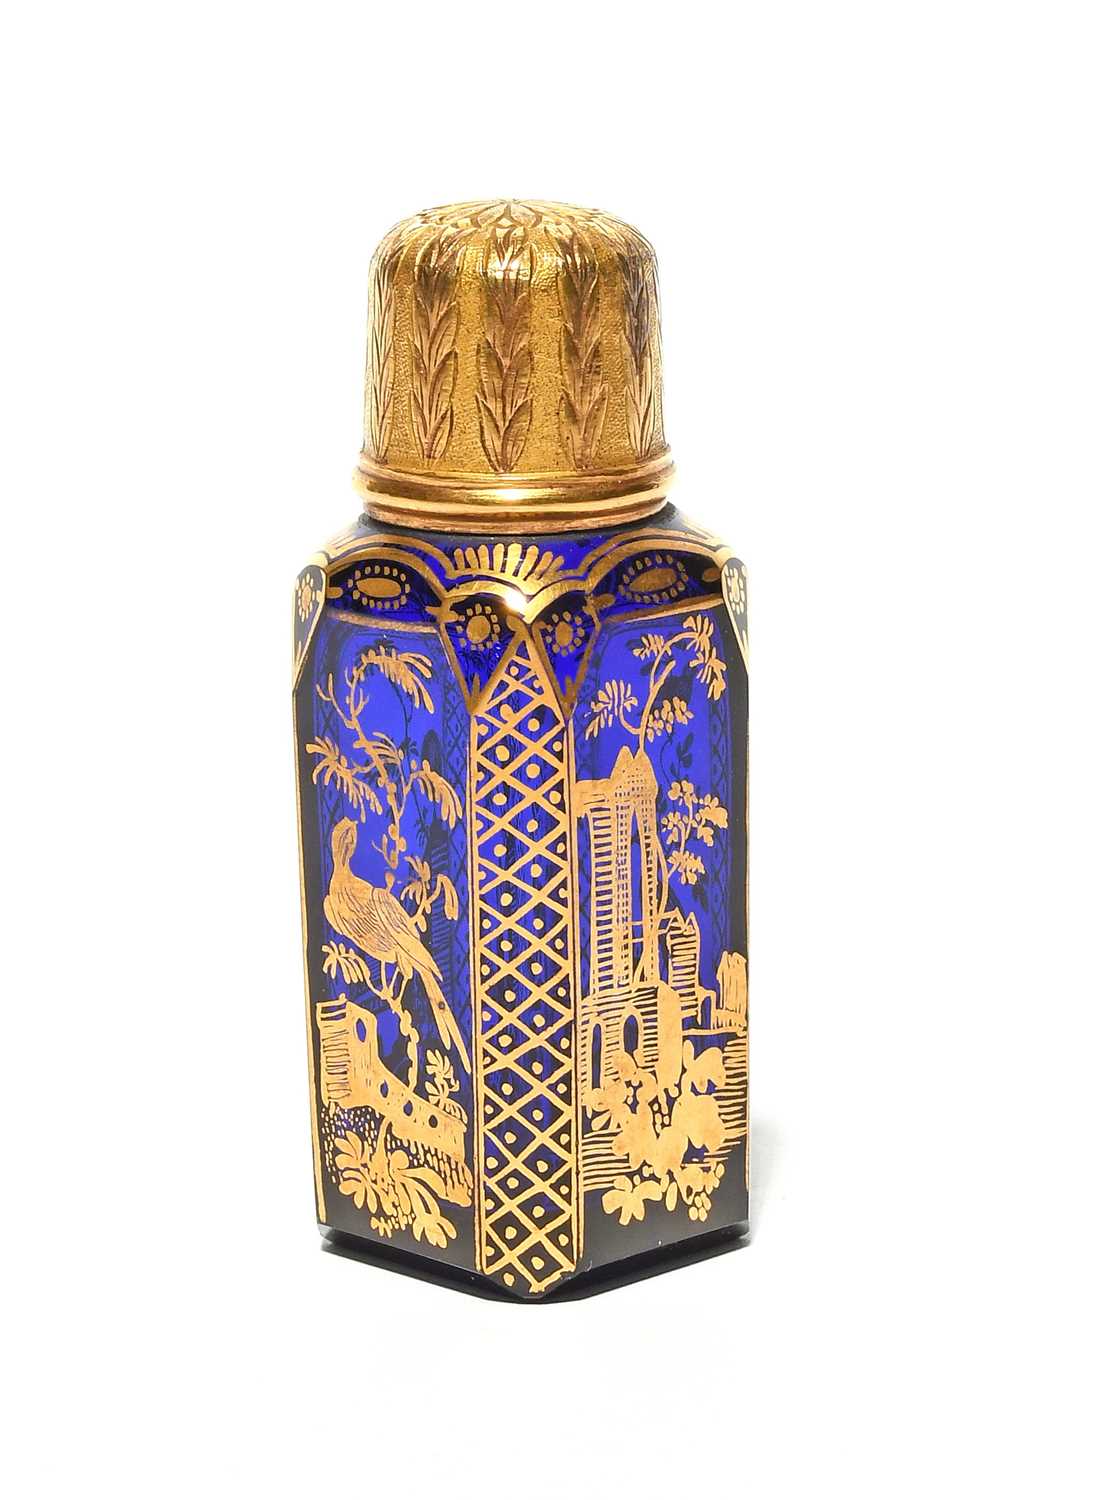 A glass scent bottle decorated in the workshop of James Giles, c.1770, the rich blue glass of